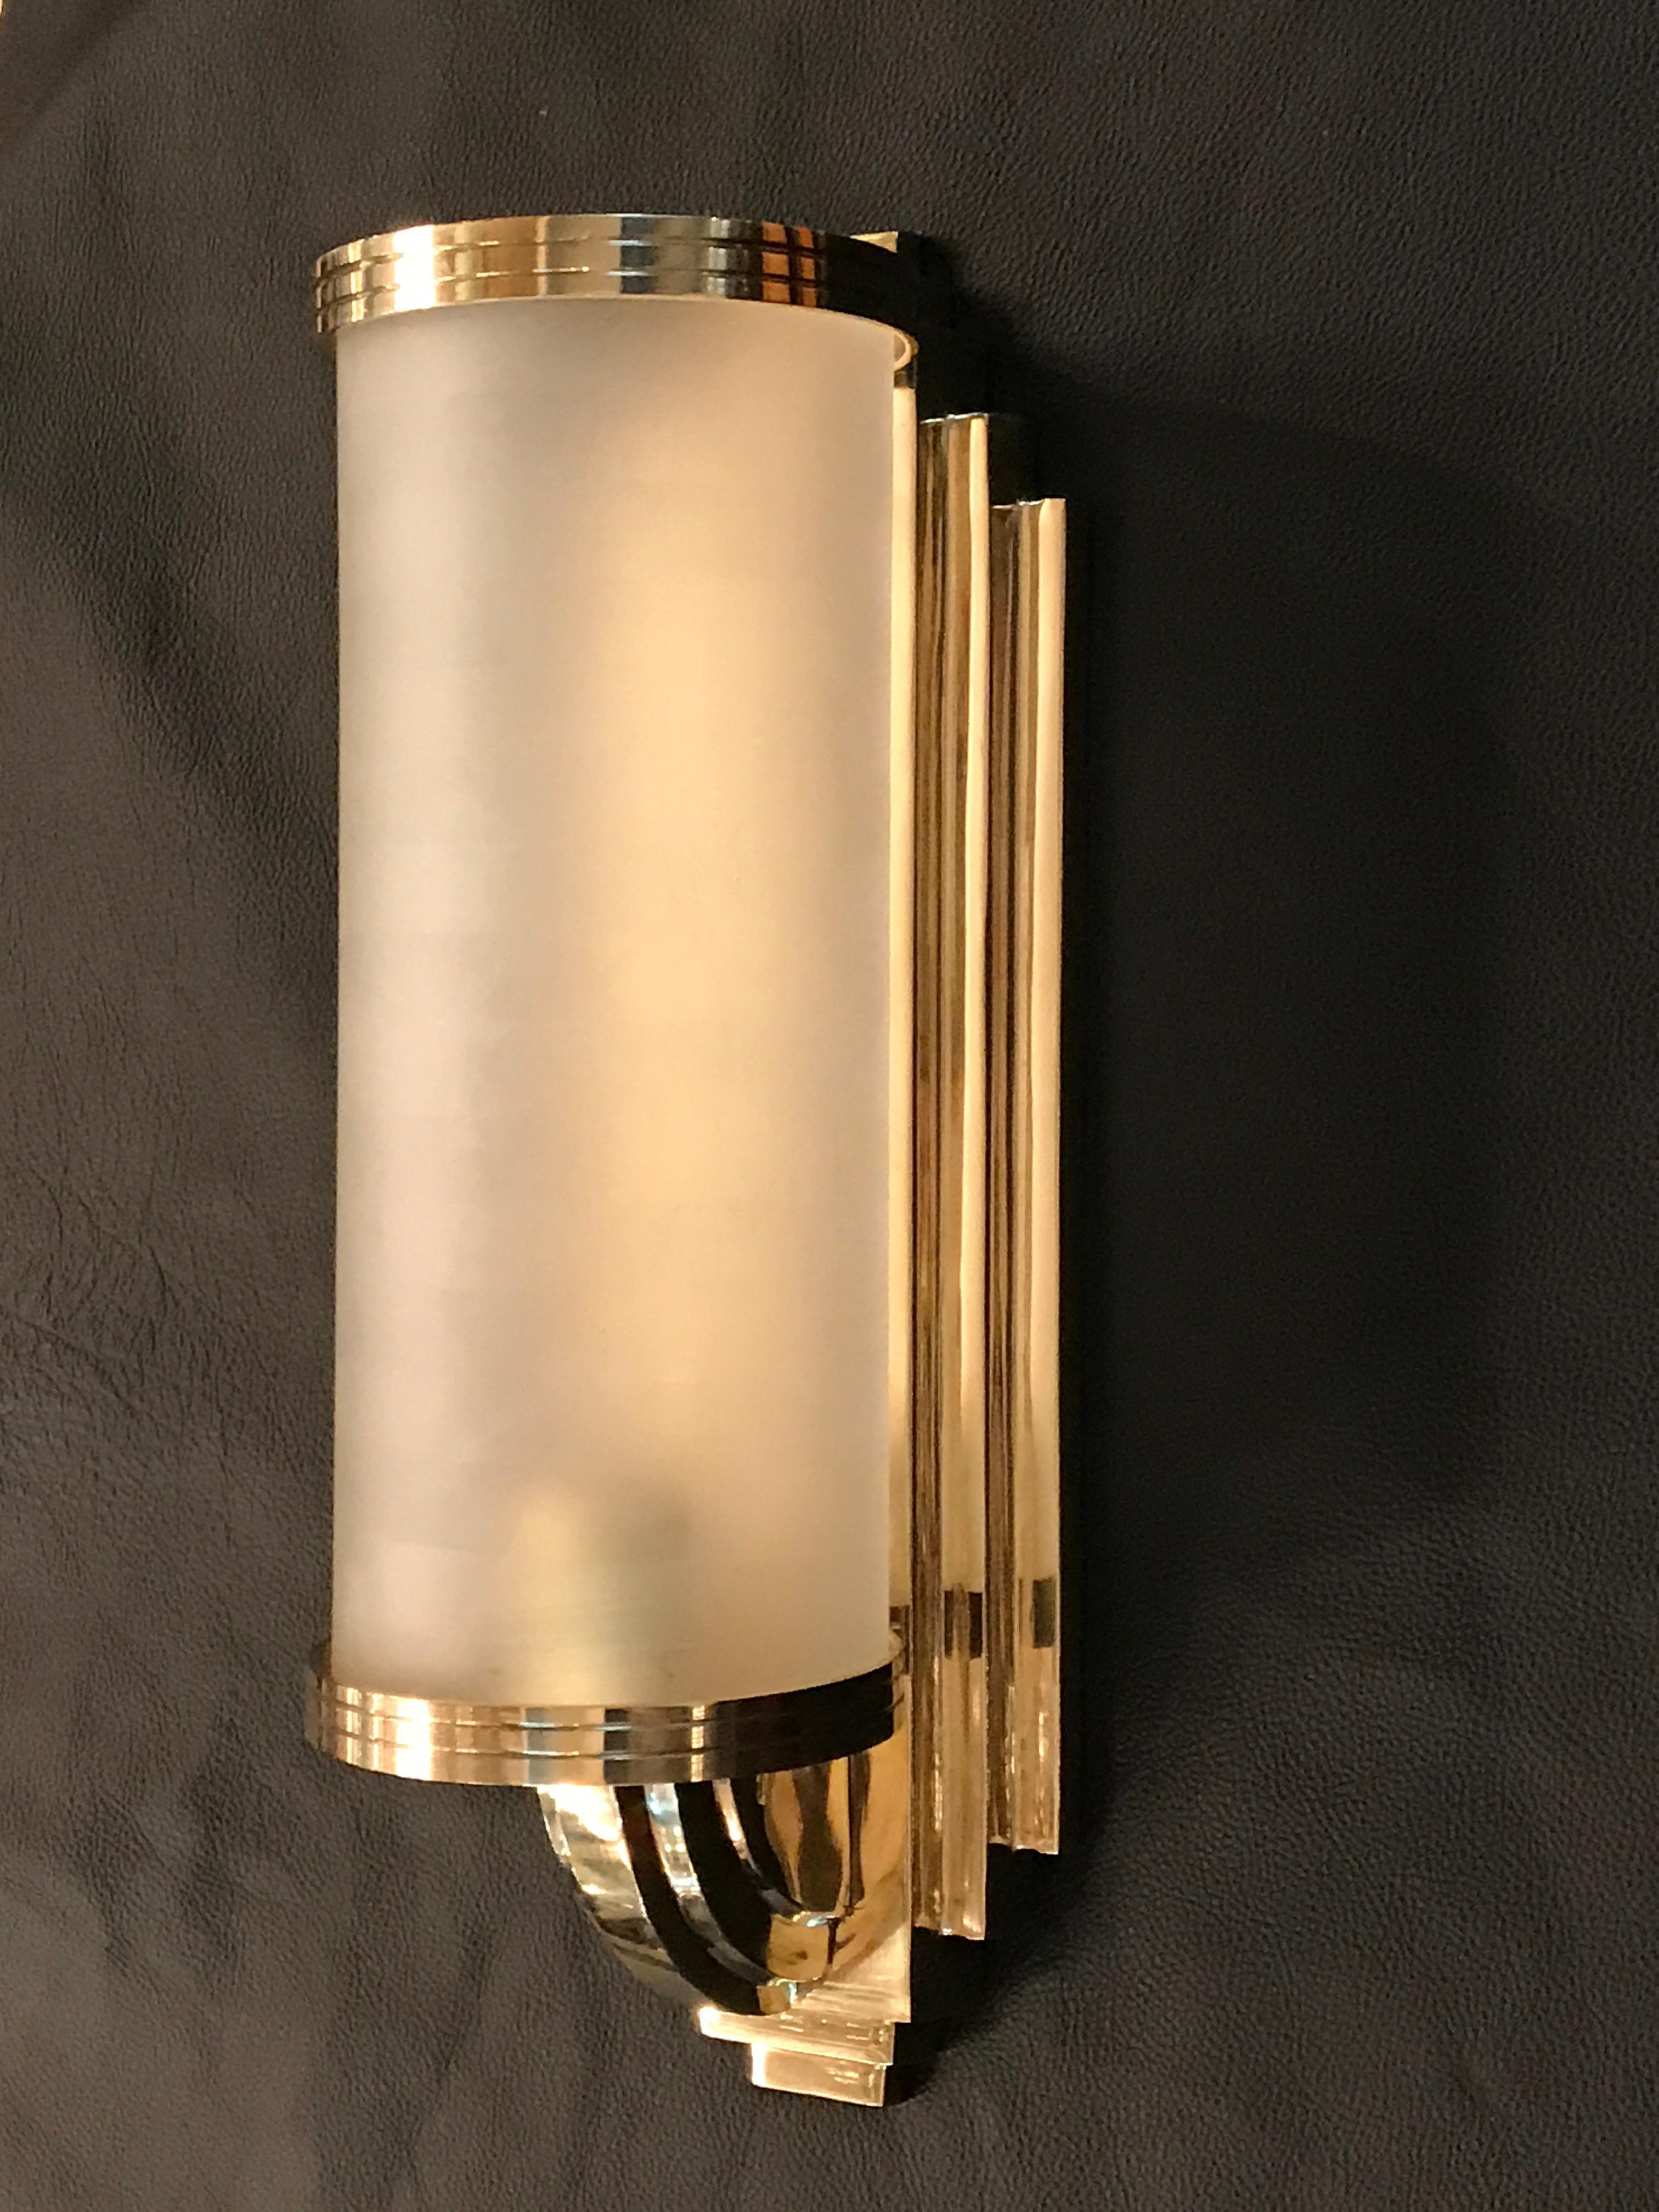 2 French Sconces in Bronze and Glass, Style: Art Deco, Year: 1930, German For Sale 11